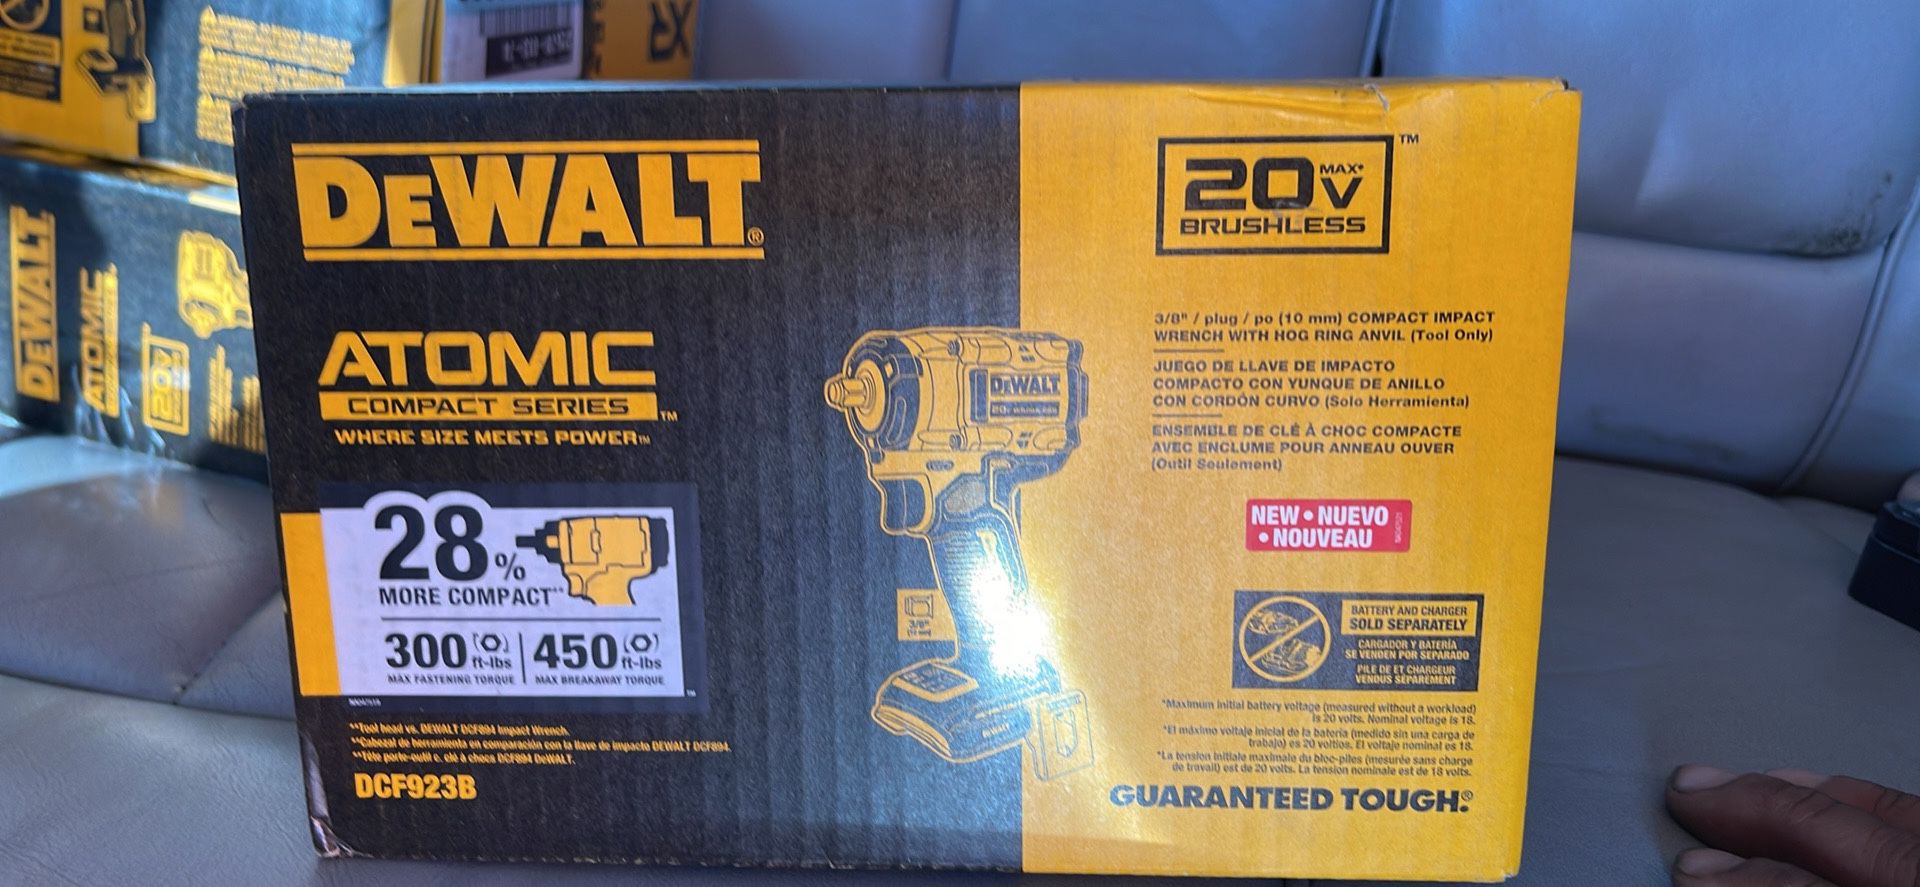 3/8”compact Impact Wrench 